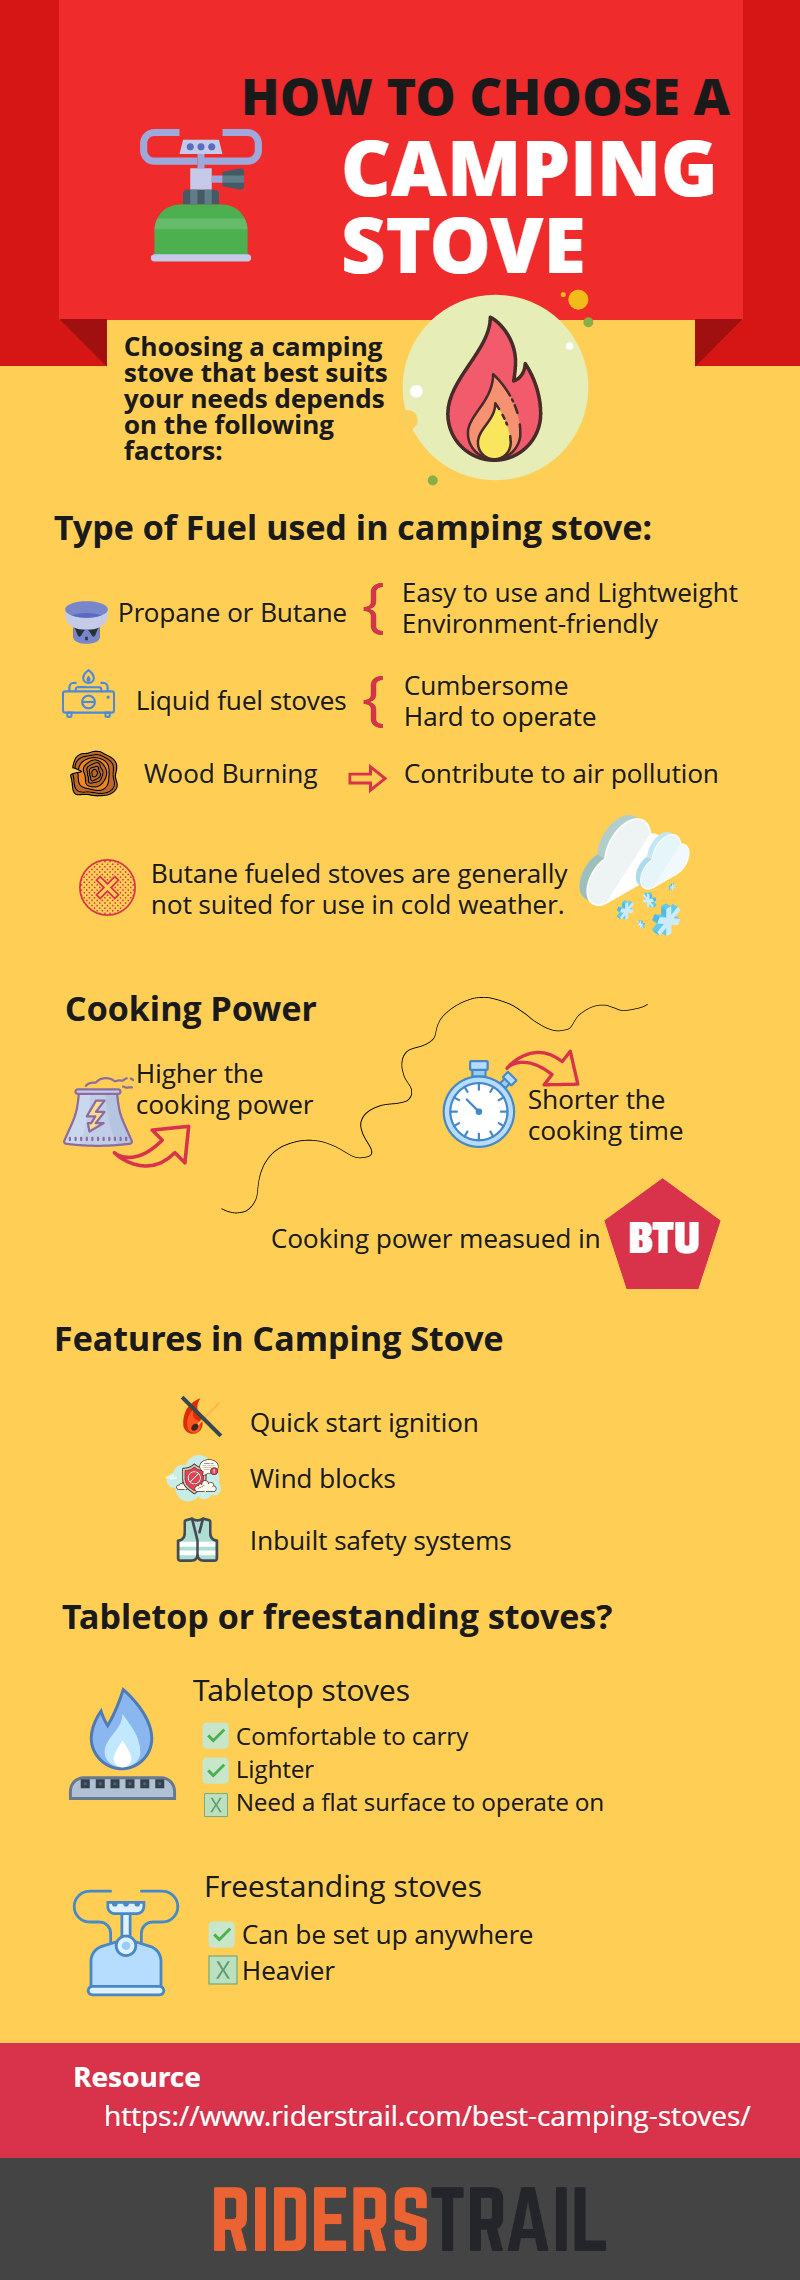 How to choose a Camping stove